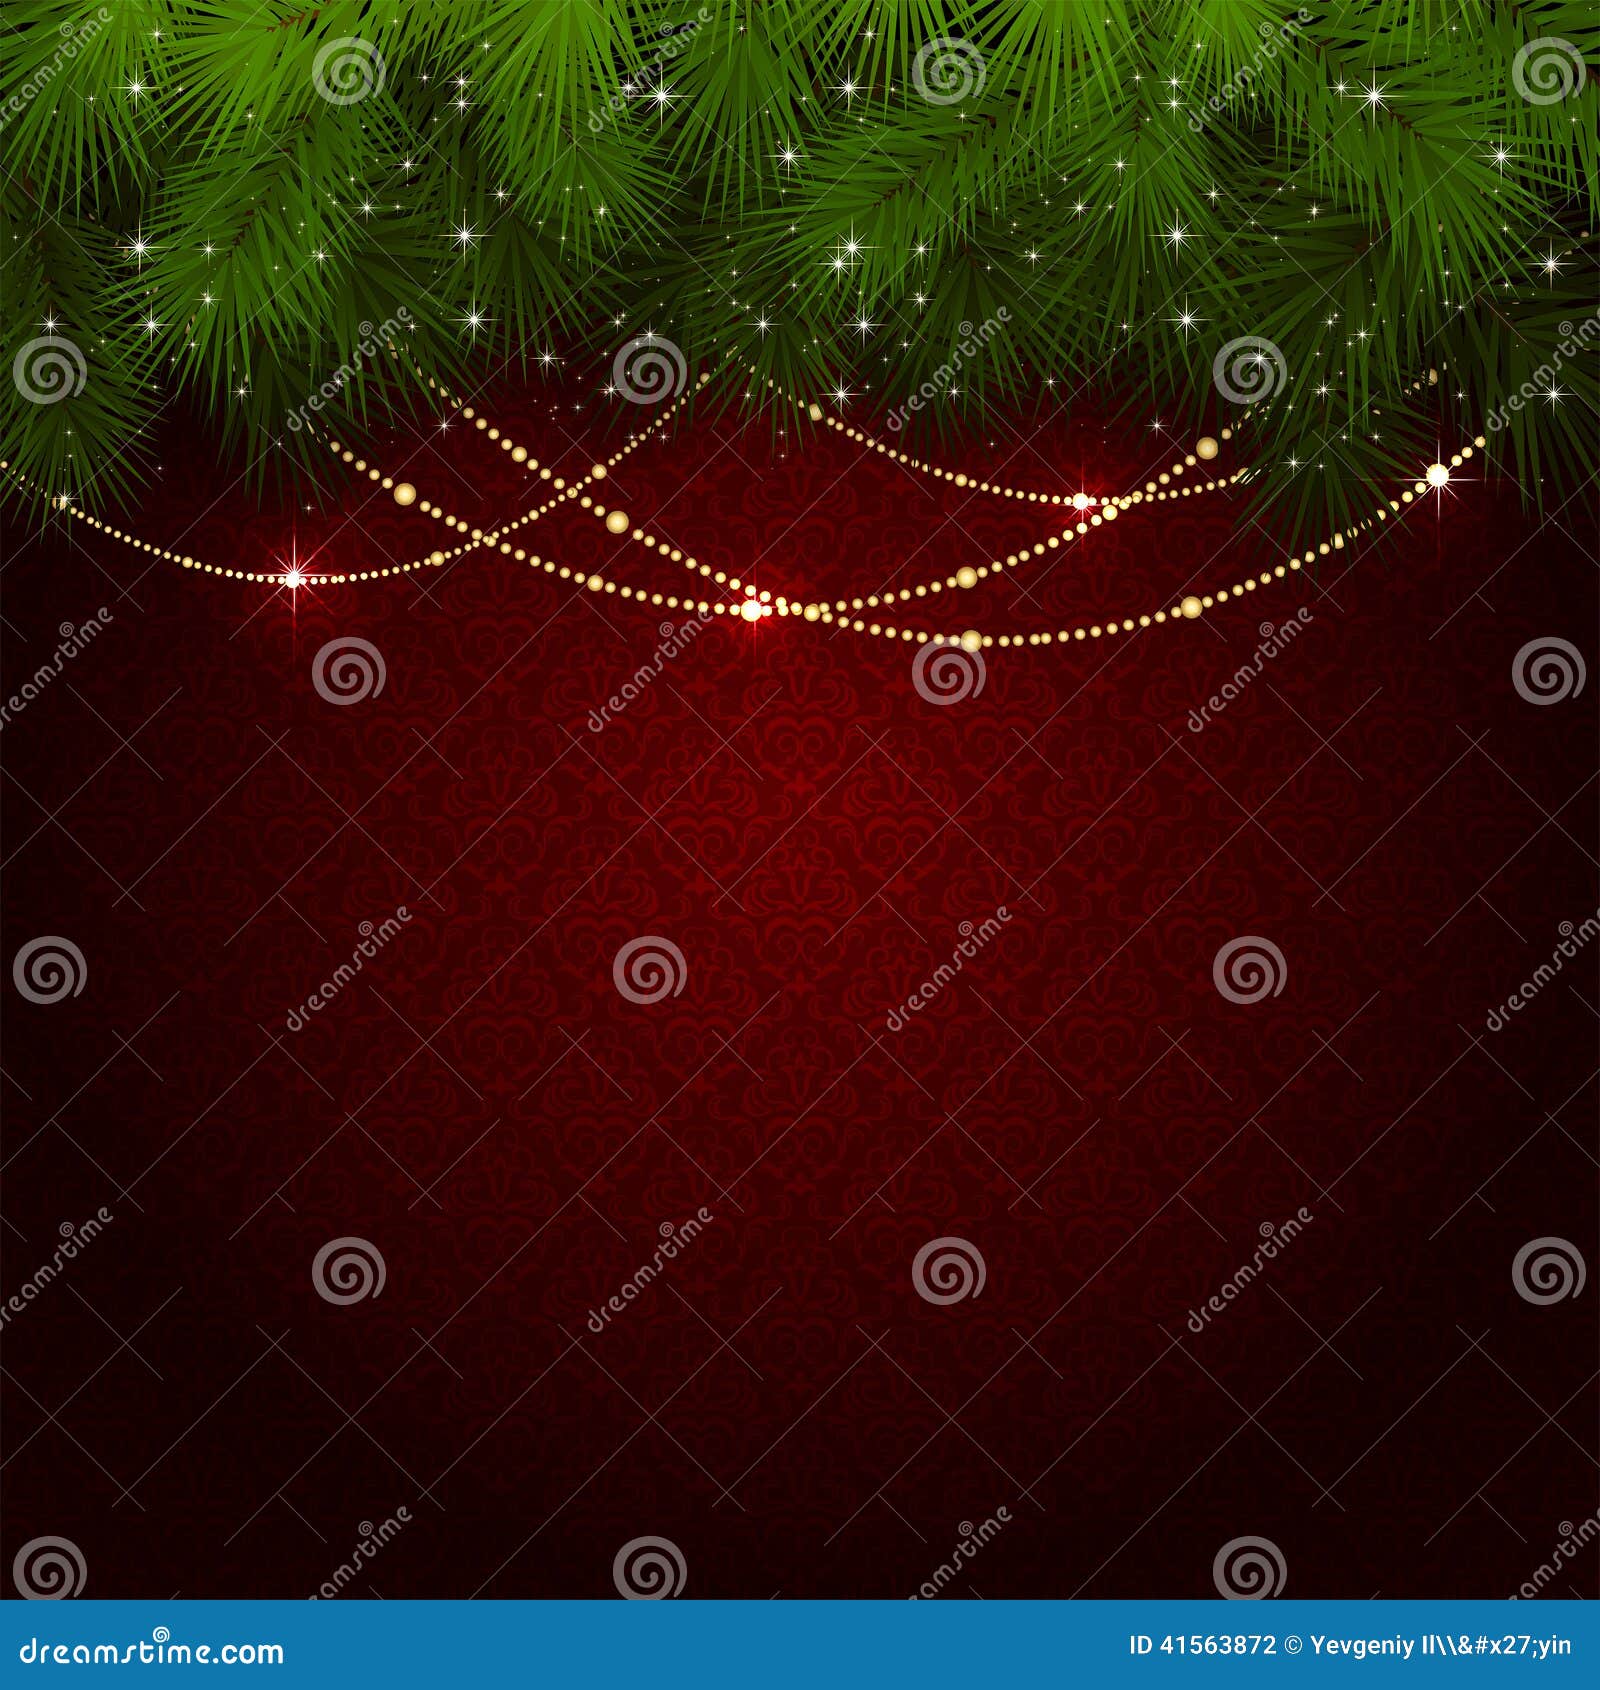 Christmas Wallpaper Stock Photos Images and Backgrounds for Free Download